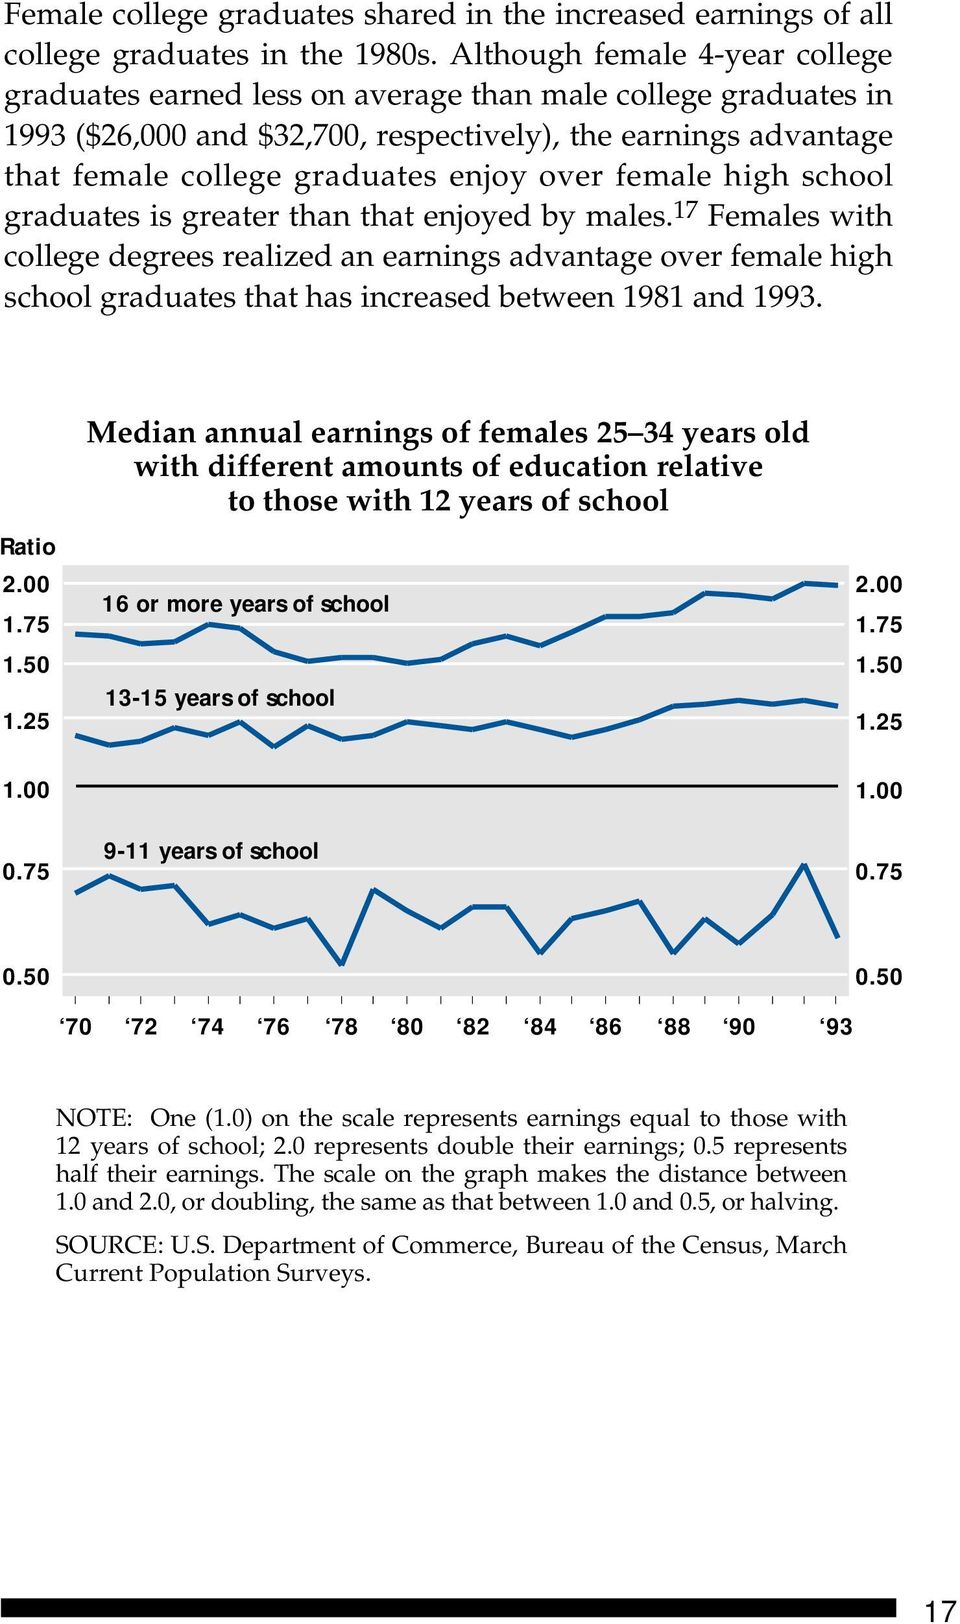 over female high school graduates is greater than that enjoyed by males.